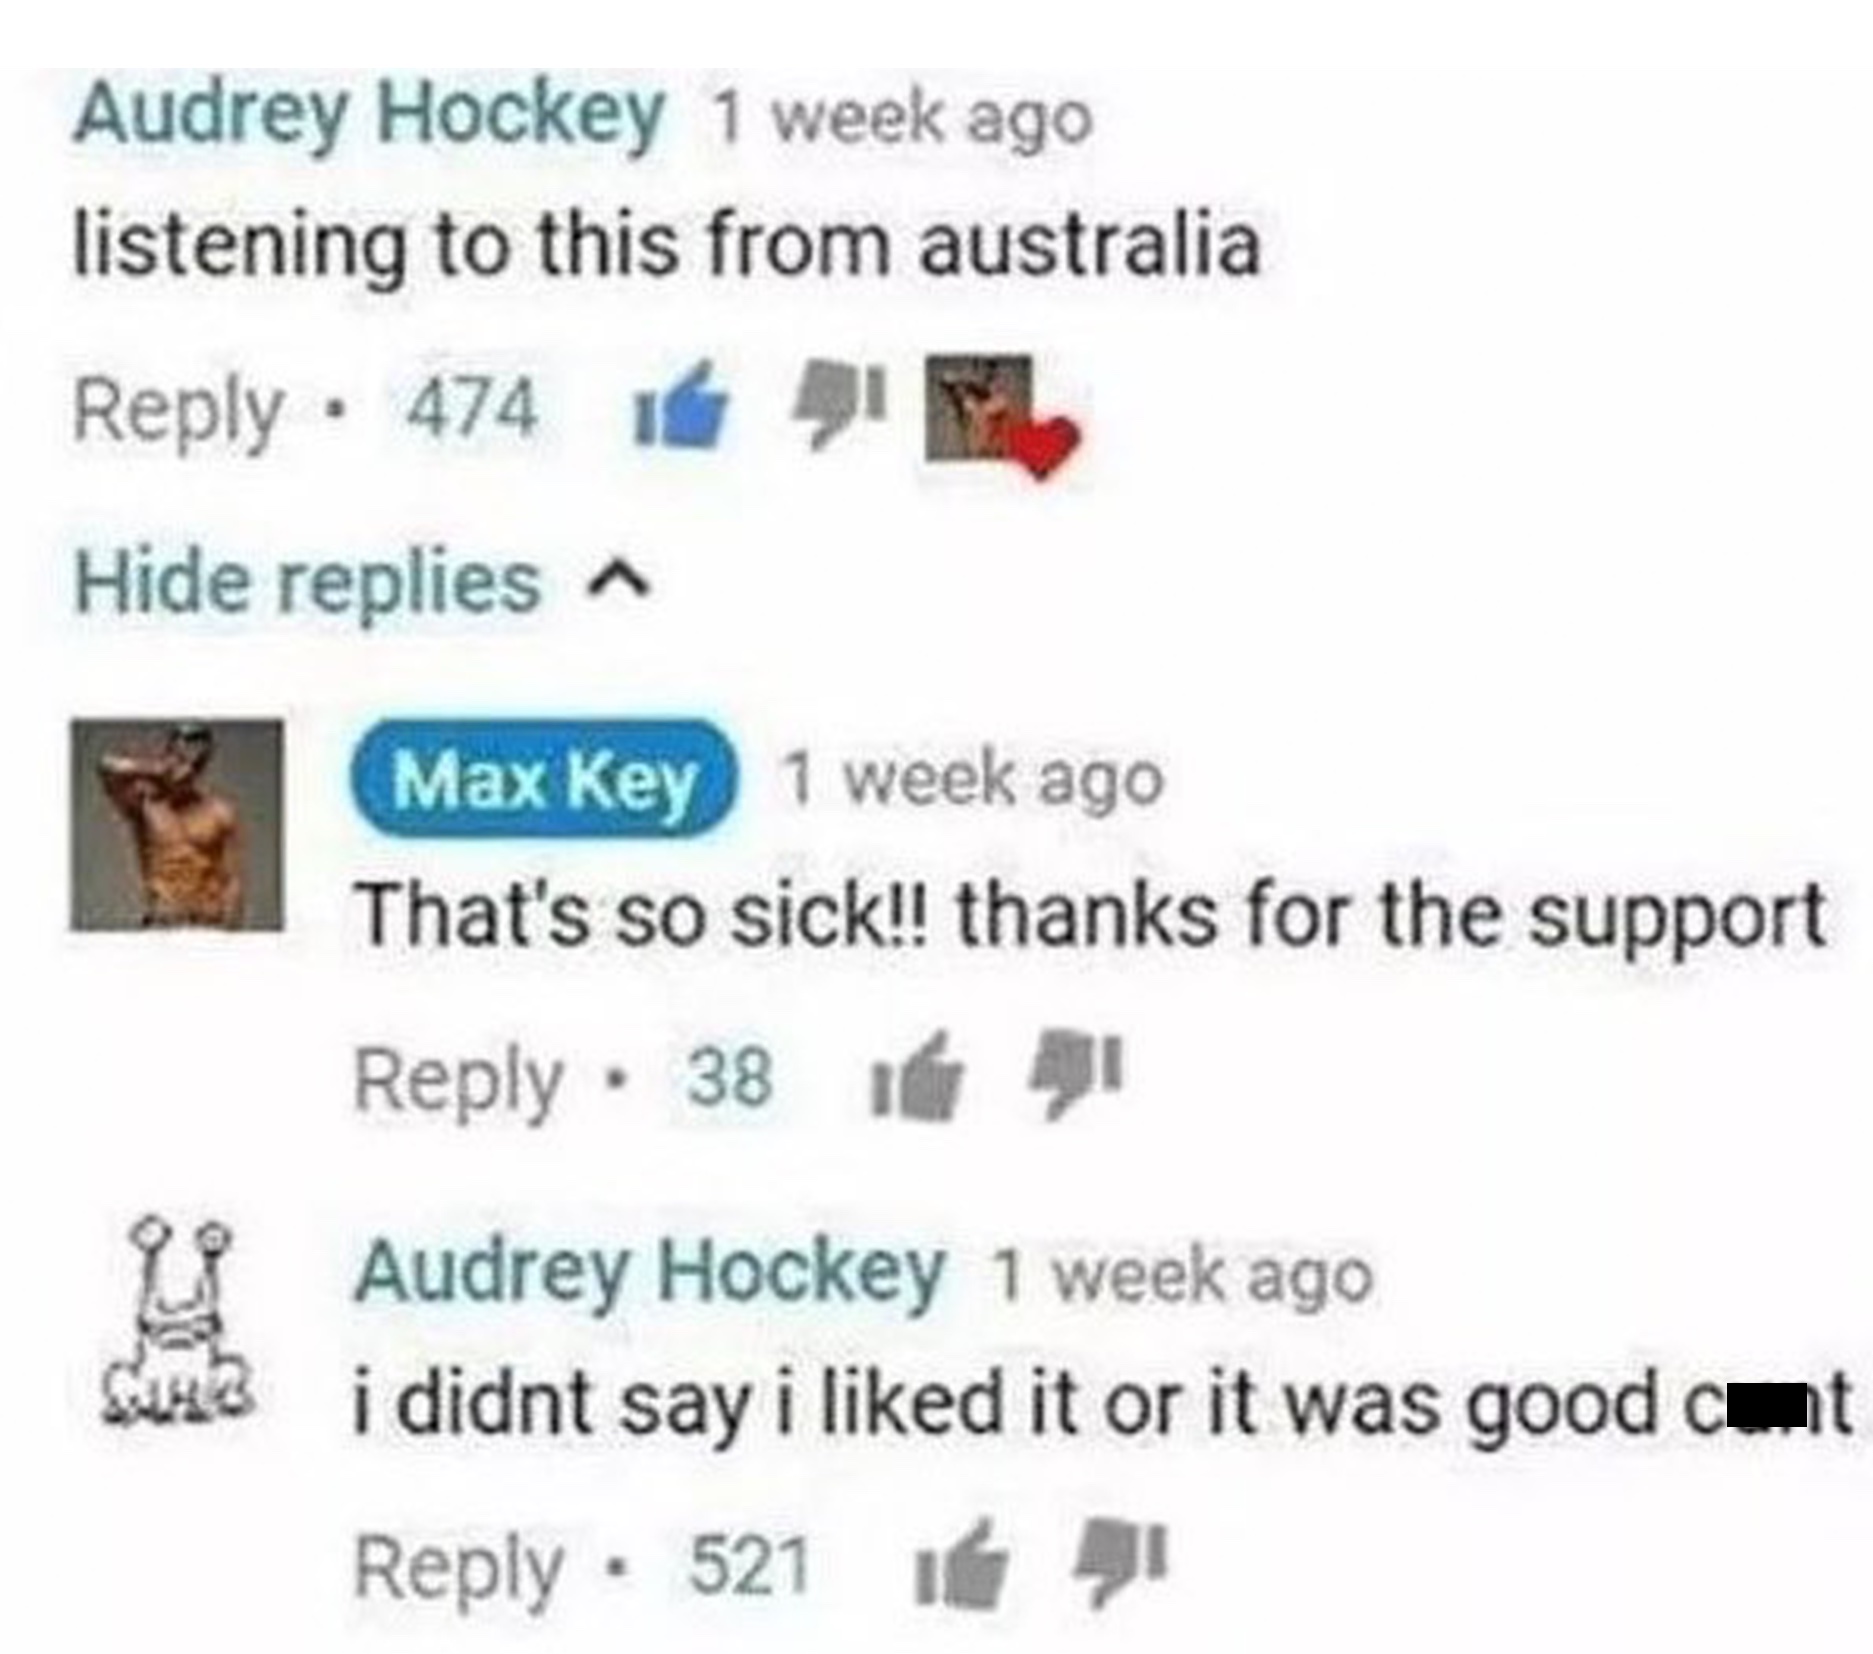 Insane YouTube Comments - diagram - Audrey Hockey 1 week ago listening to this from australia 474 1 1 Hide replies Max Key 1 week ago That's so sick!! thanks for the support 38 1 Audrey Hockey 1 week ago i didnt say i d it or it was good cont 521 Hi G Su